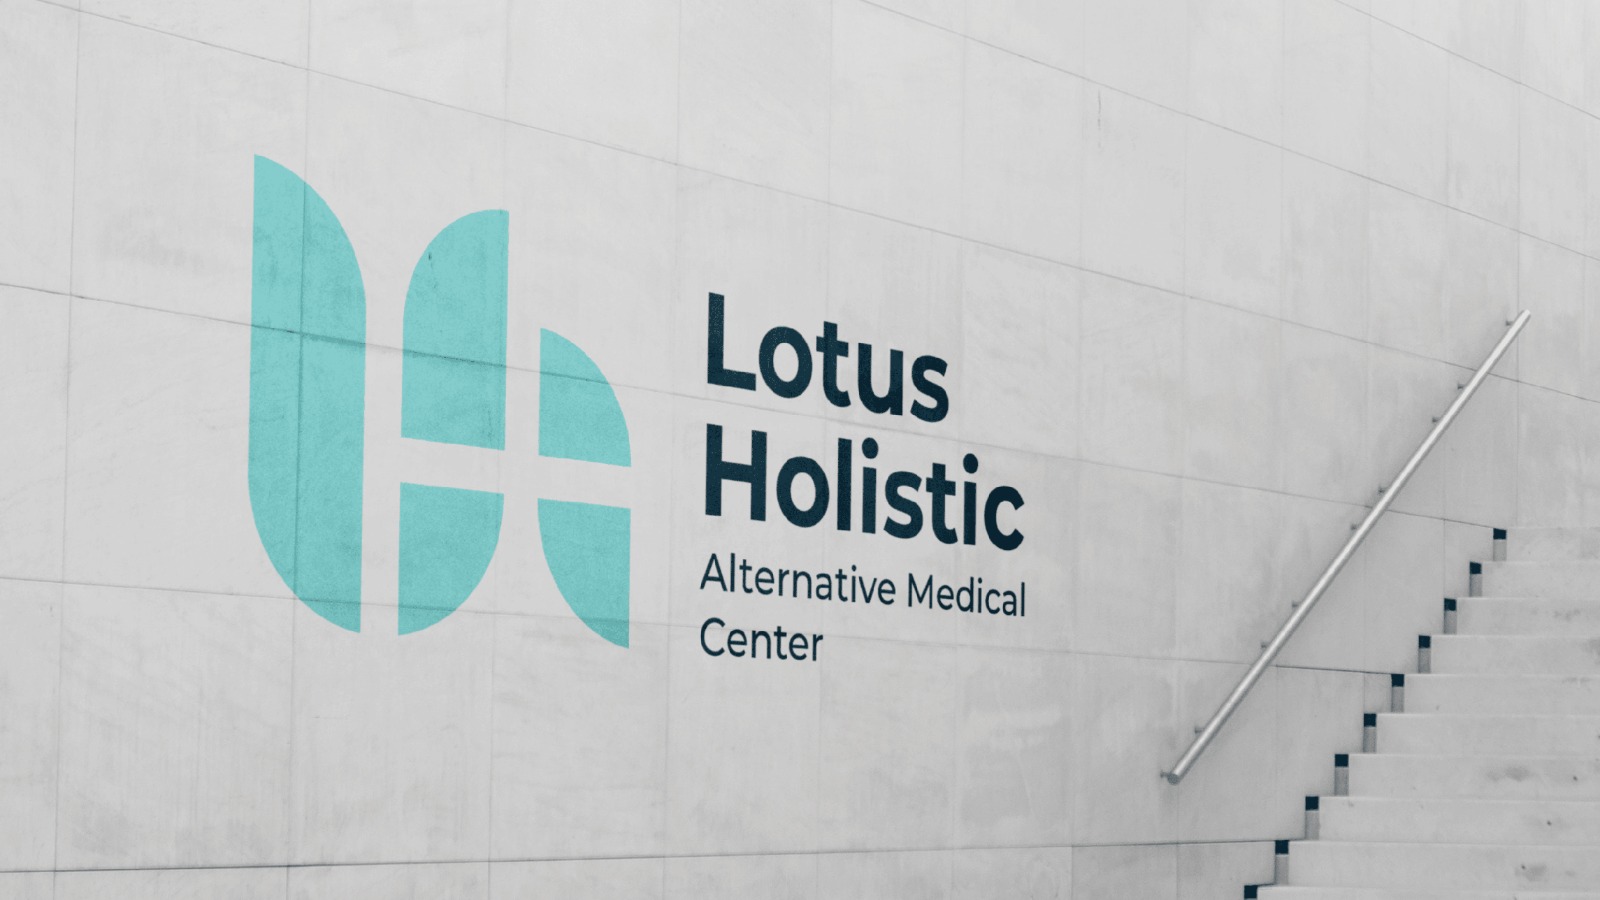 Lotus Holistic Unveils Rebranding in Partnership with Aimstyle | Aimstyle Graphics